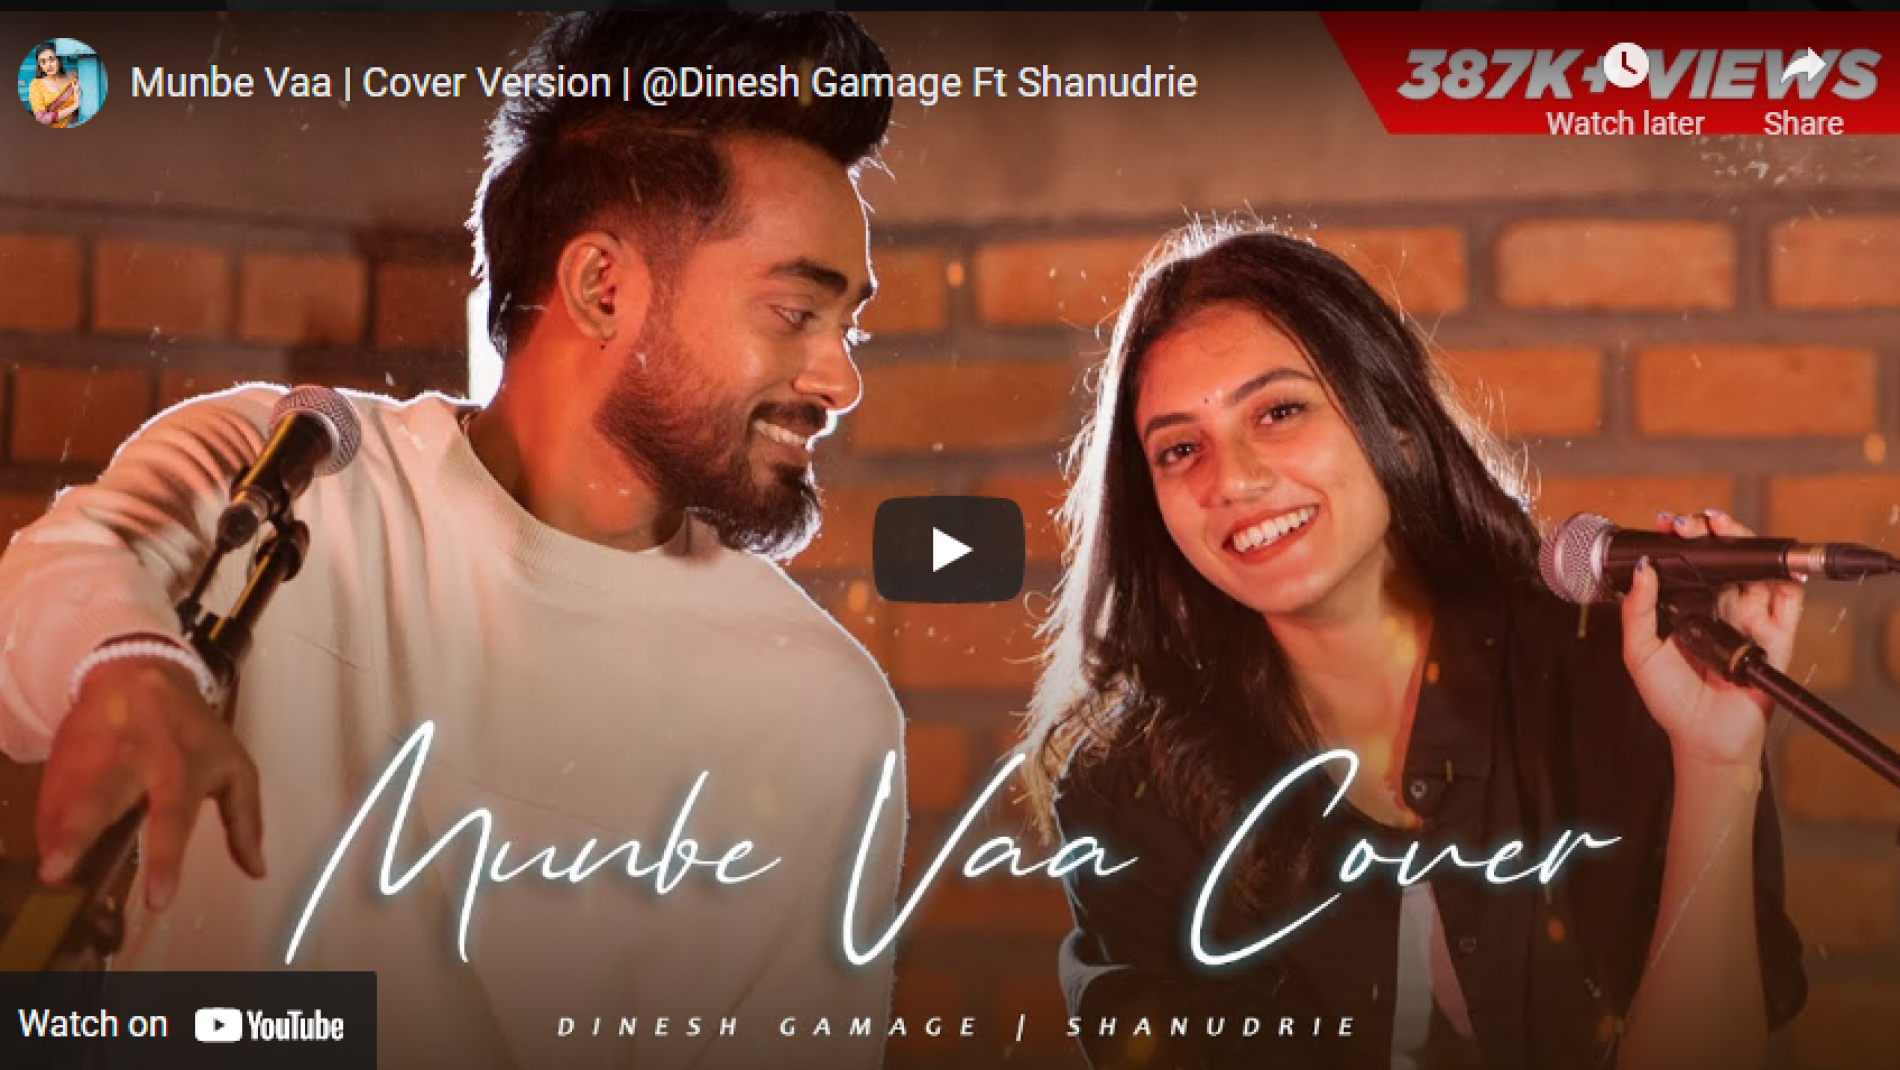 New Music : Munbe Vaa | Cover Version | @Dinesh Gamage Ft Shanudrie